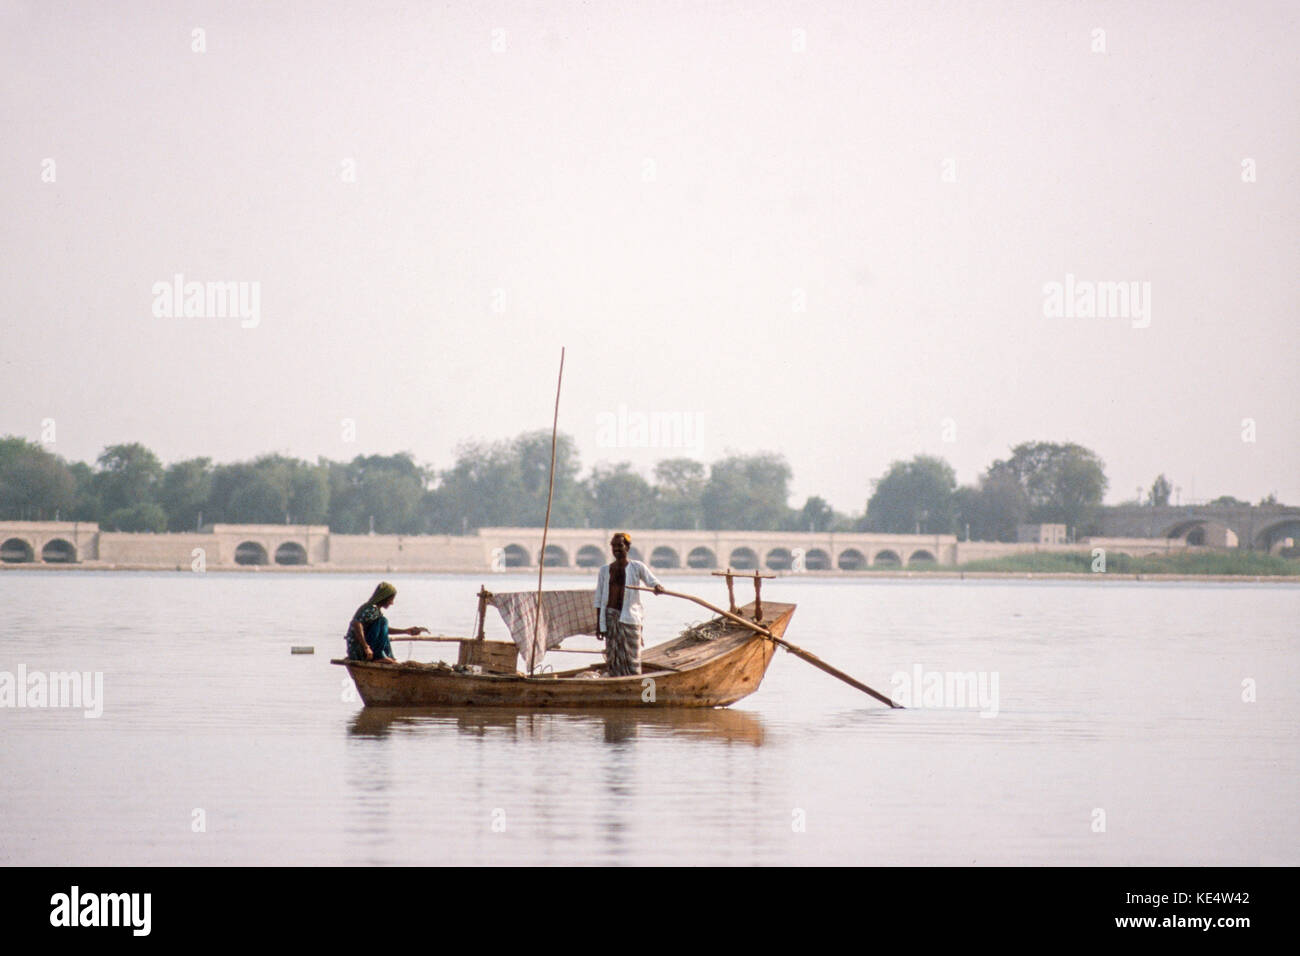 A fisherman and his wife on lake Manchar, Sindh province, Pakistan beside the British-built barrage at Sukkur, that created the lake in the 1930's. Stock Photo